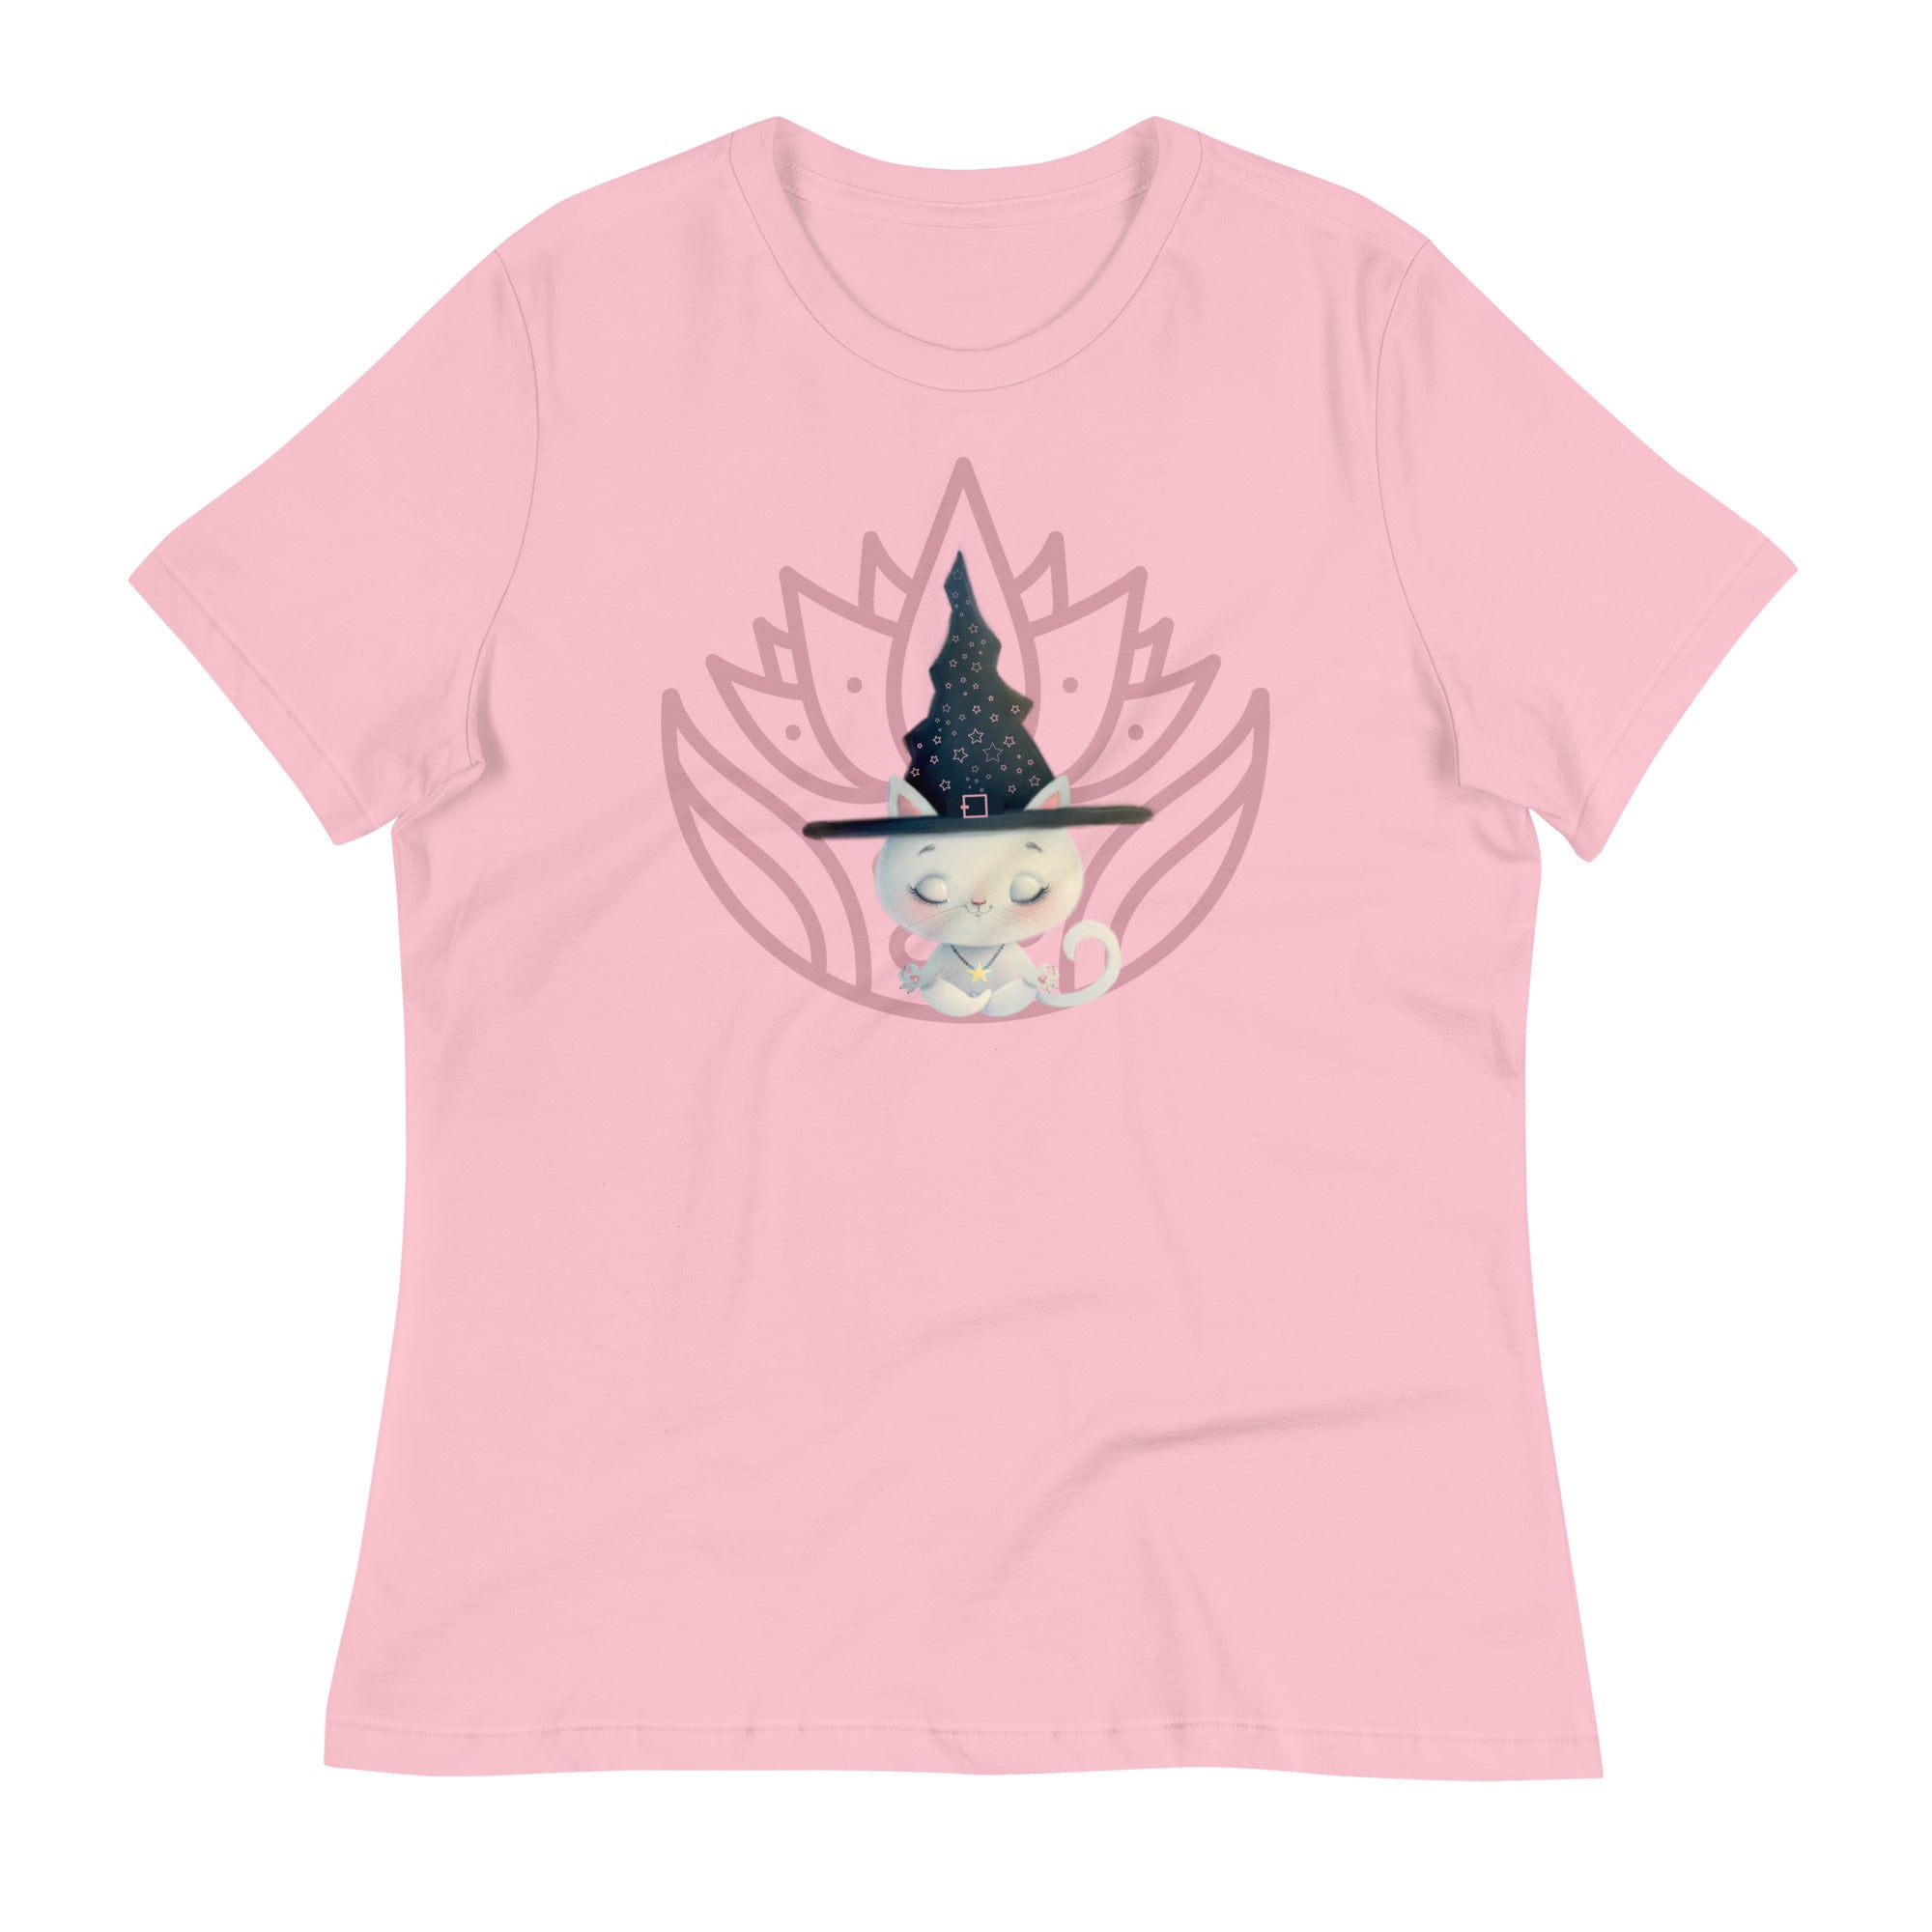 Axolotl witch with lotus print tee for women - Lioness-love.com